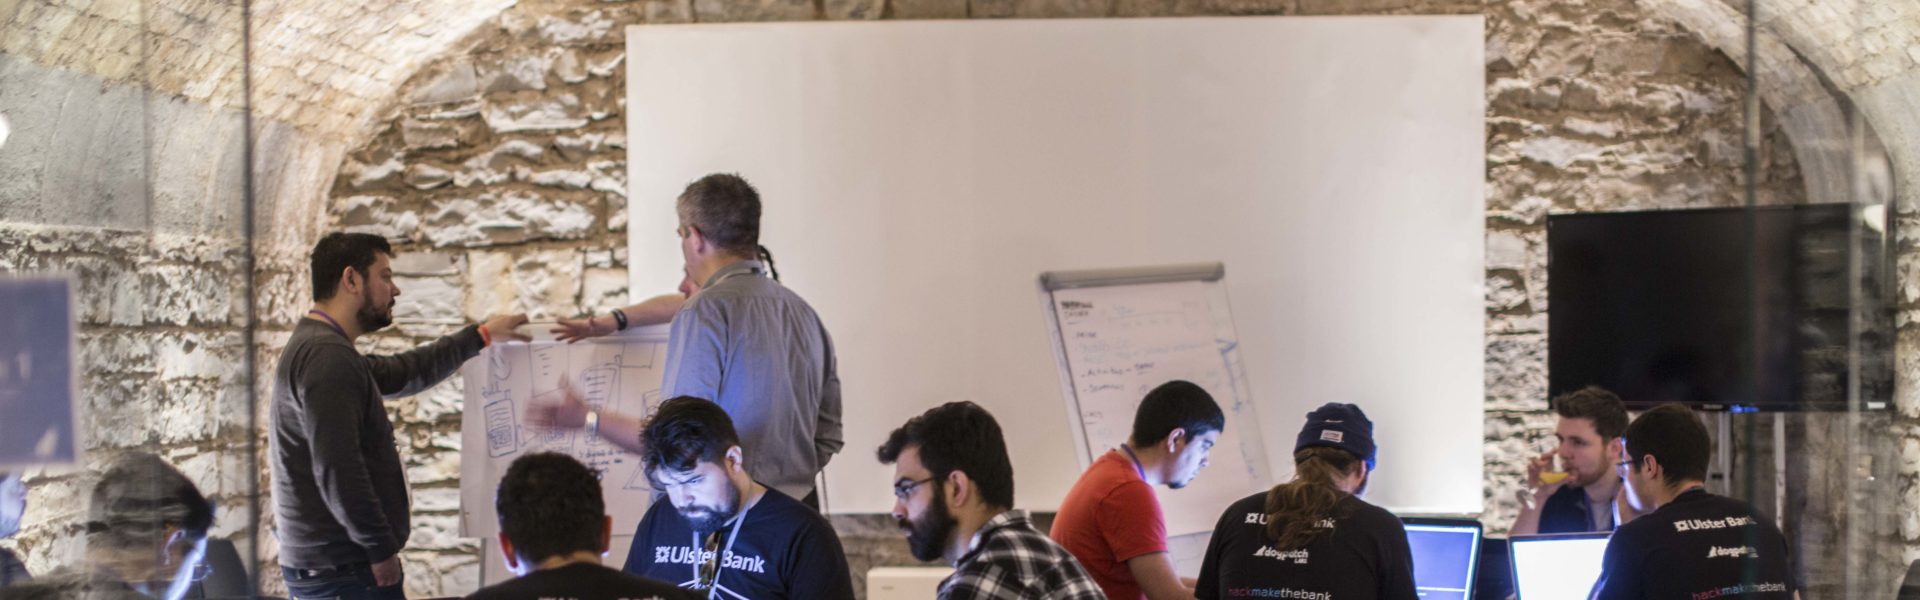 Corporate Hackathons – Disrupting the Future over a Weekend